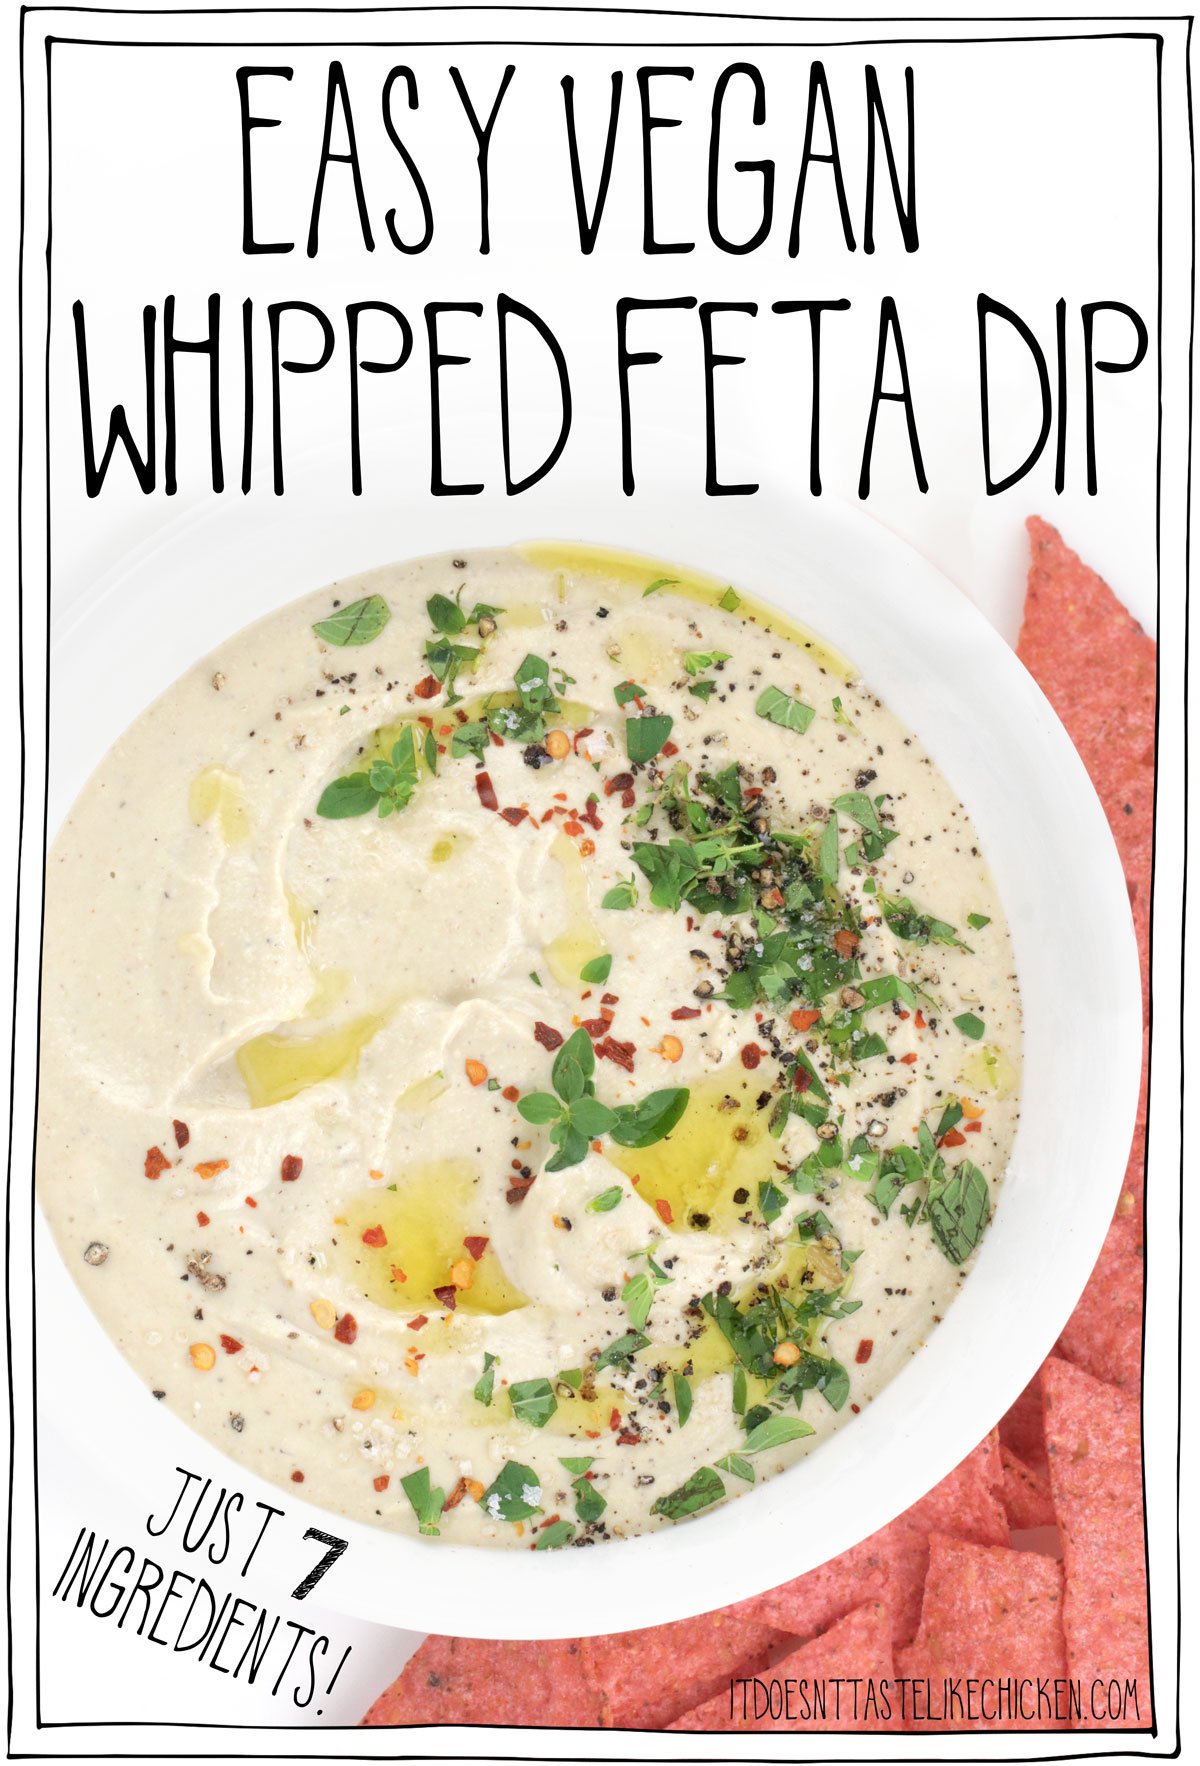 Just 7 ingredients and 20 minutes or less to make this easy vegan whipped feta dip! The perfect vegan appetizer for parties or a snack for yourself. Creamy, fluffy, cheesy, and tangy! #itdoesnttastelikechicken #veganappetizer